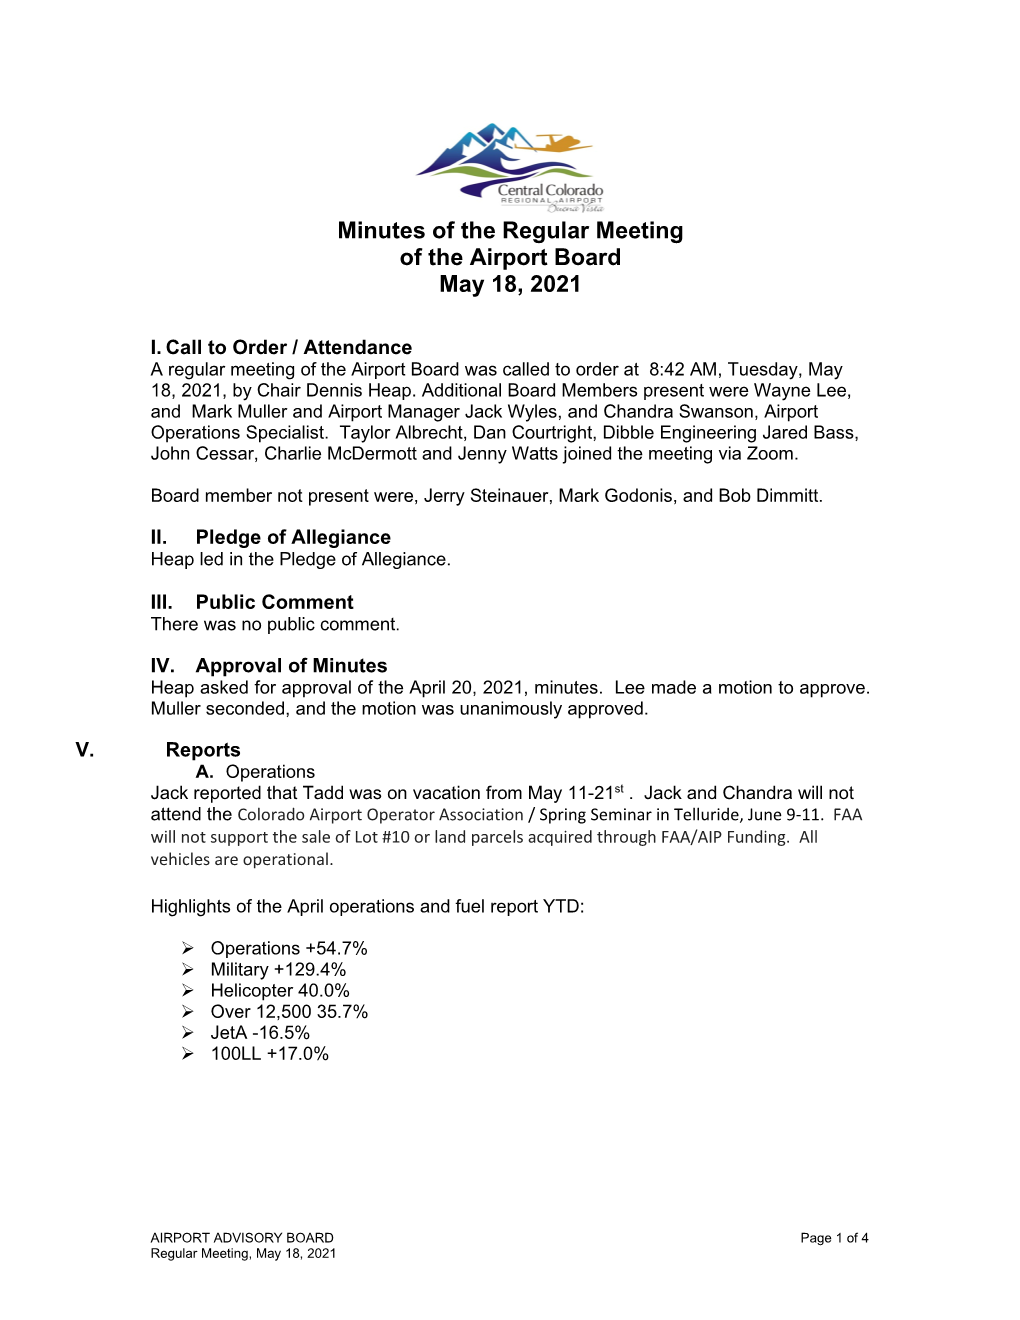 Minutes of the Regular Meeting of the Airport Board May 18, 2021